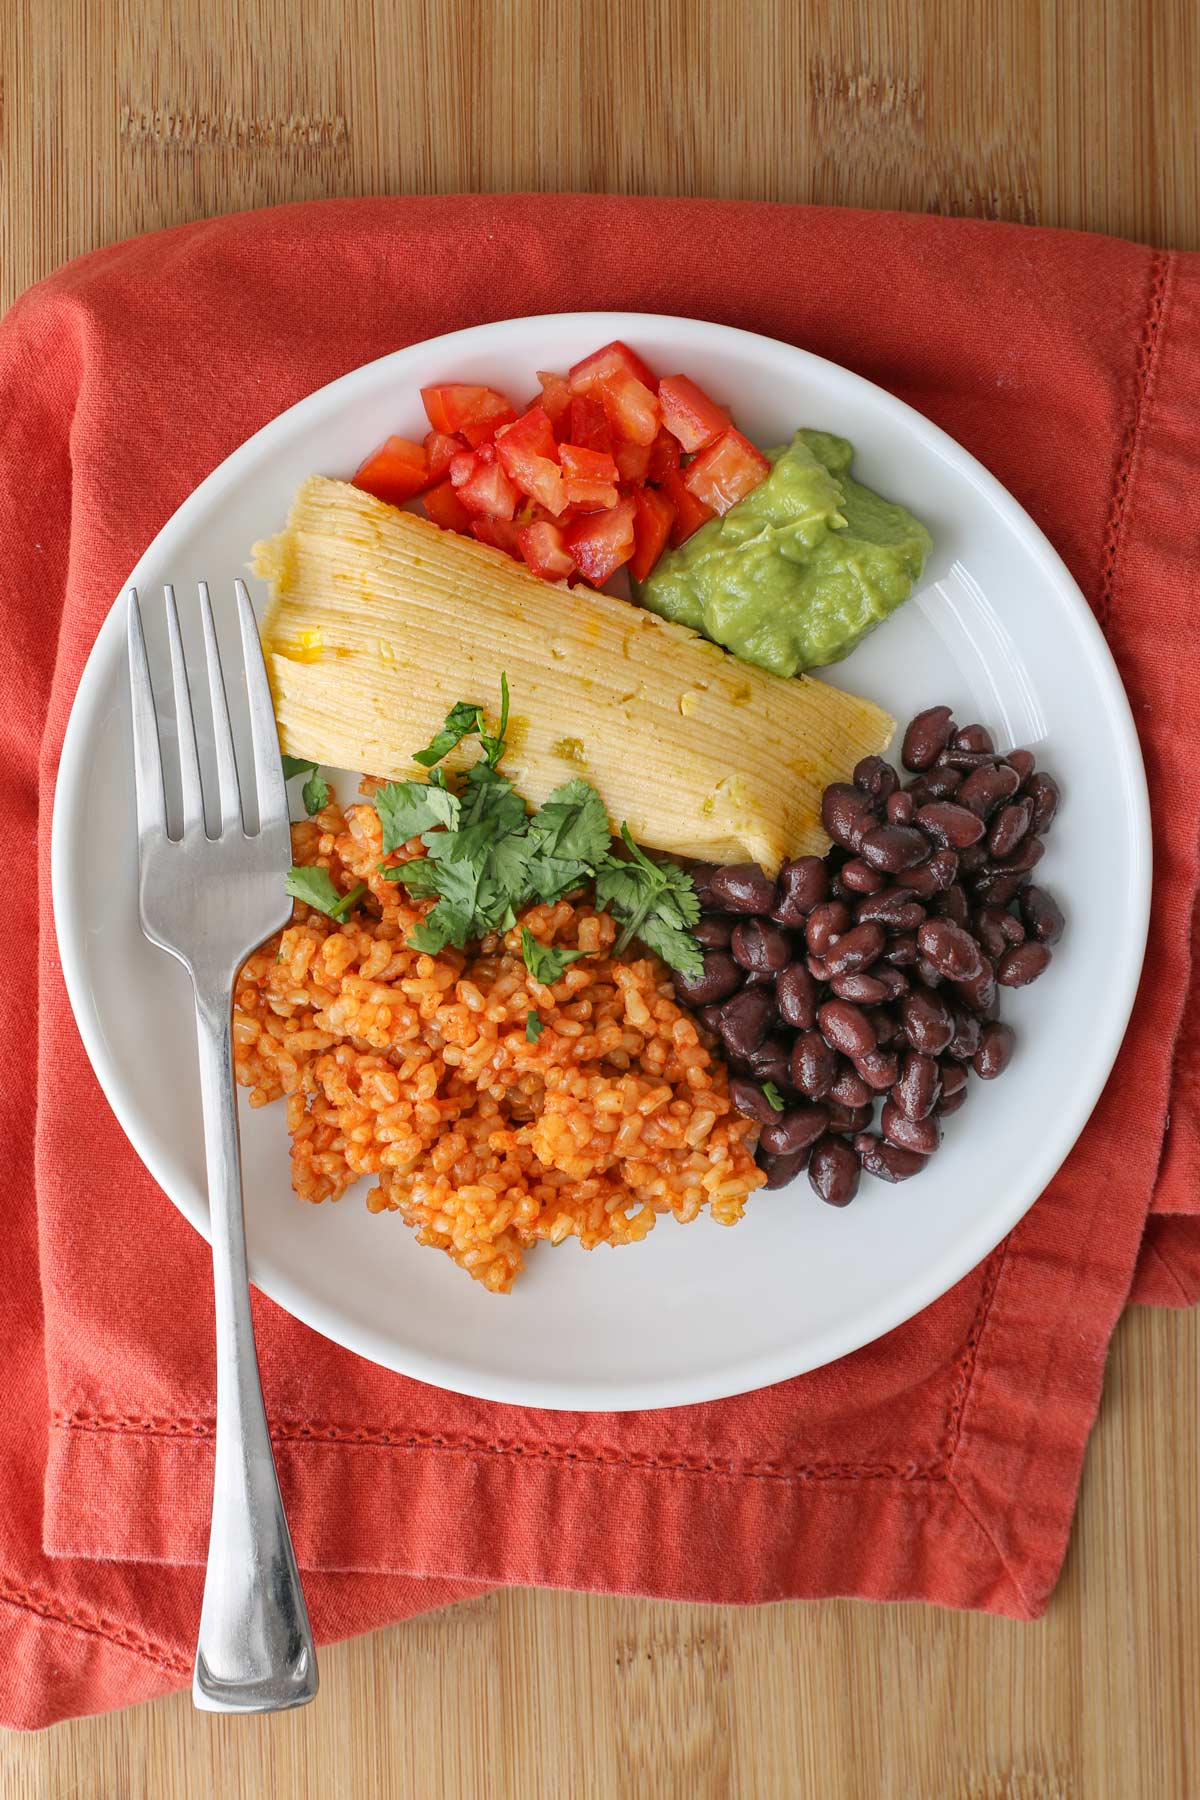 dinner plate with a cheese tamale, Spanish brown rice, beans, and condiments, on an orange napkin.